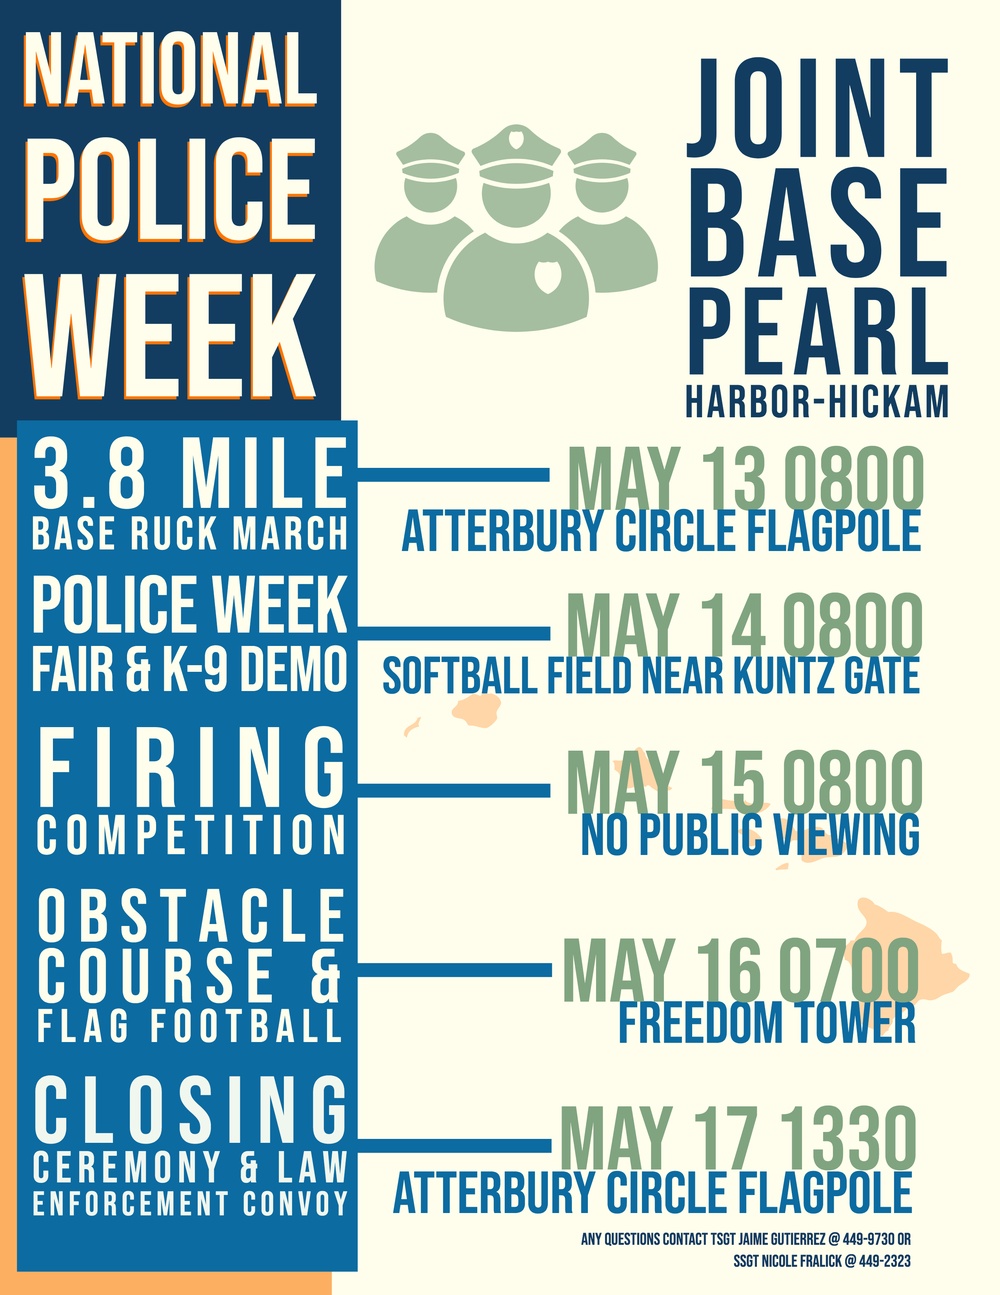 National Police Week Events - Joint Base Pearl Harbor-Hickam